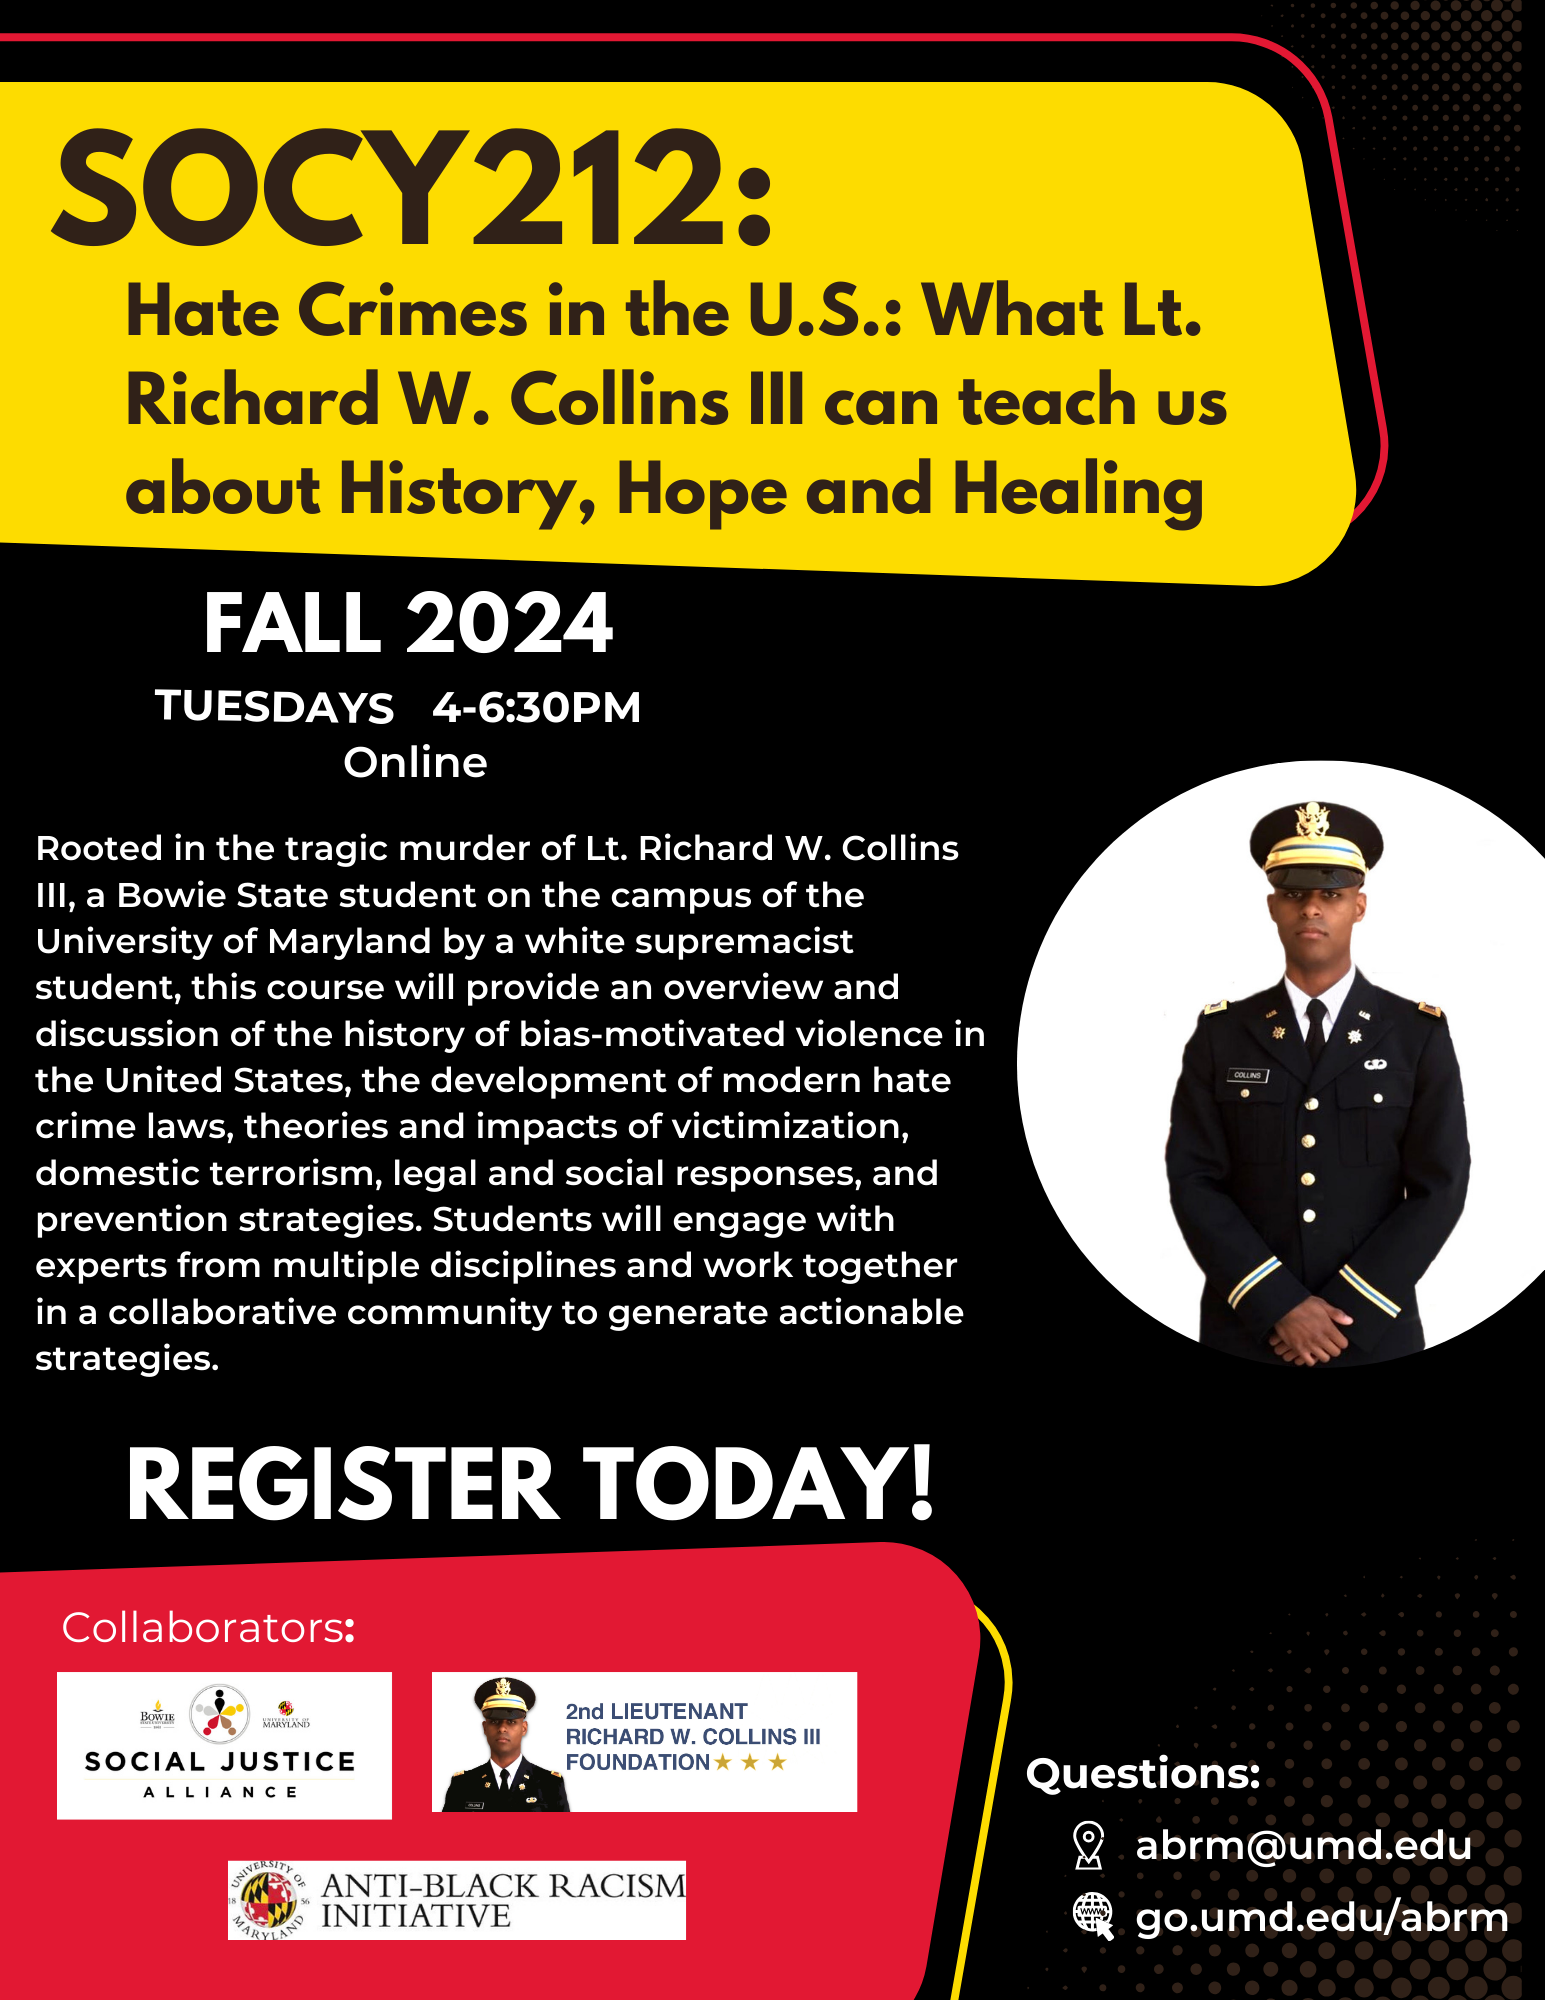 Register for SOCY212: Hate Crimes in the US: What Lt. Richard W. Collins III can teach us about History, Hope and Healing